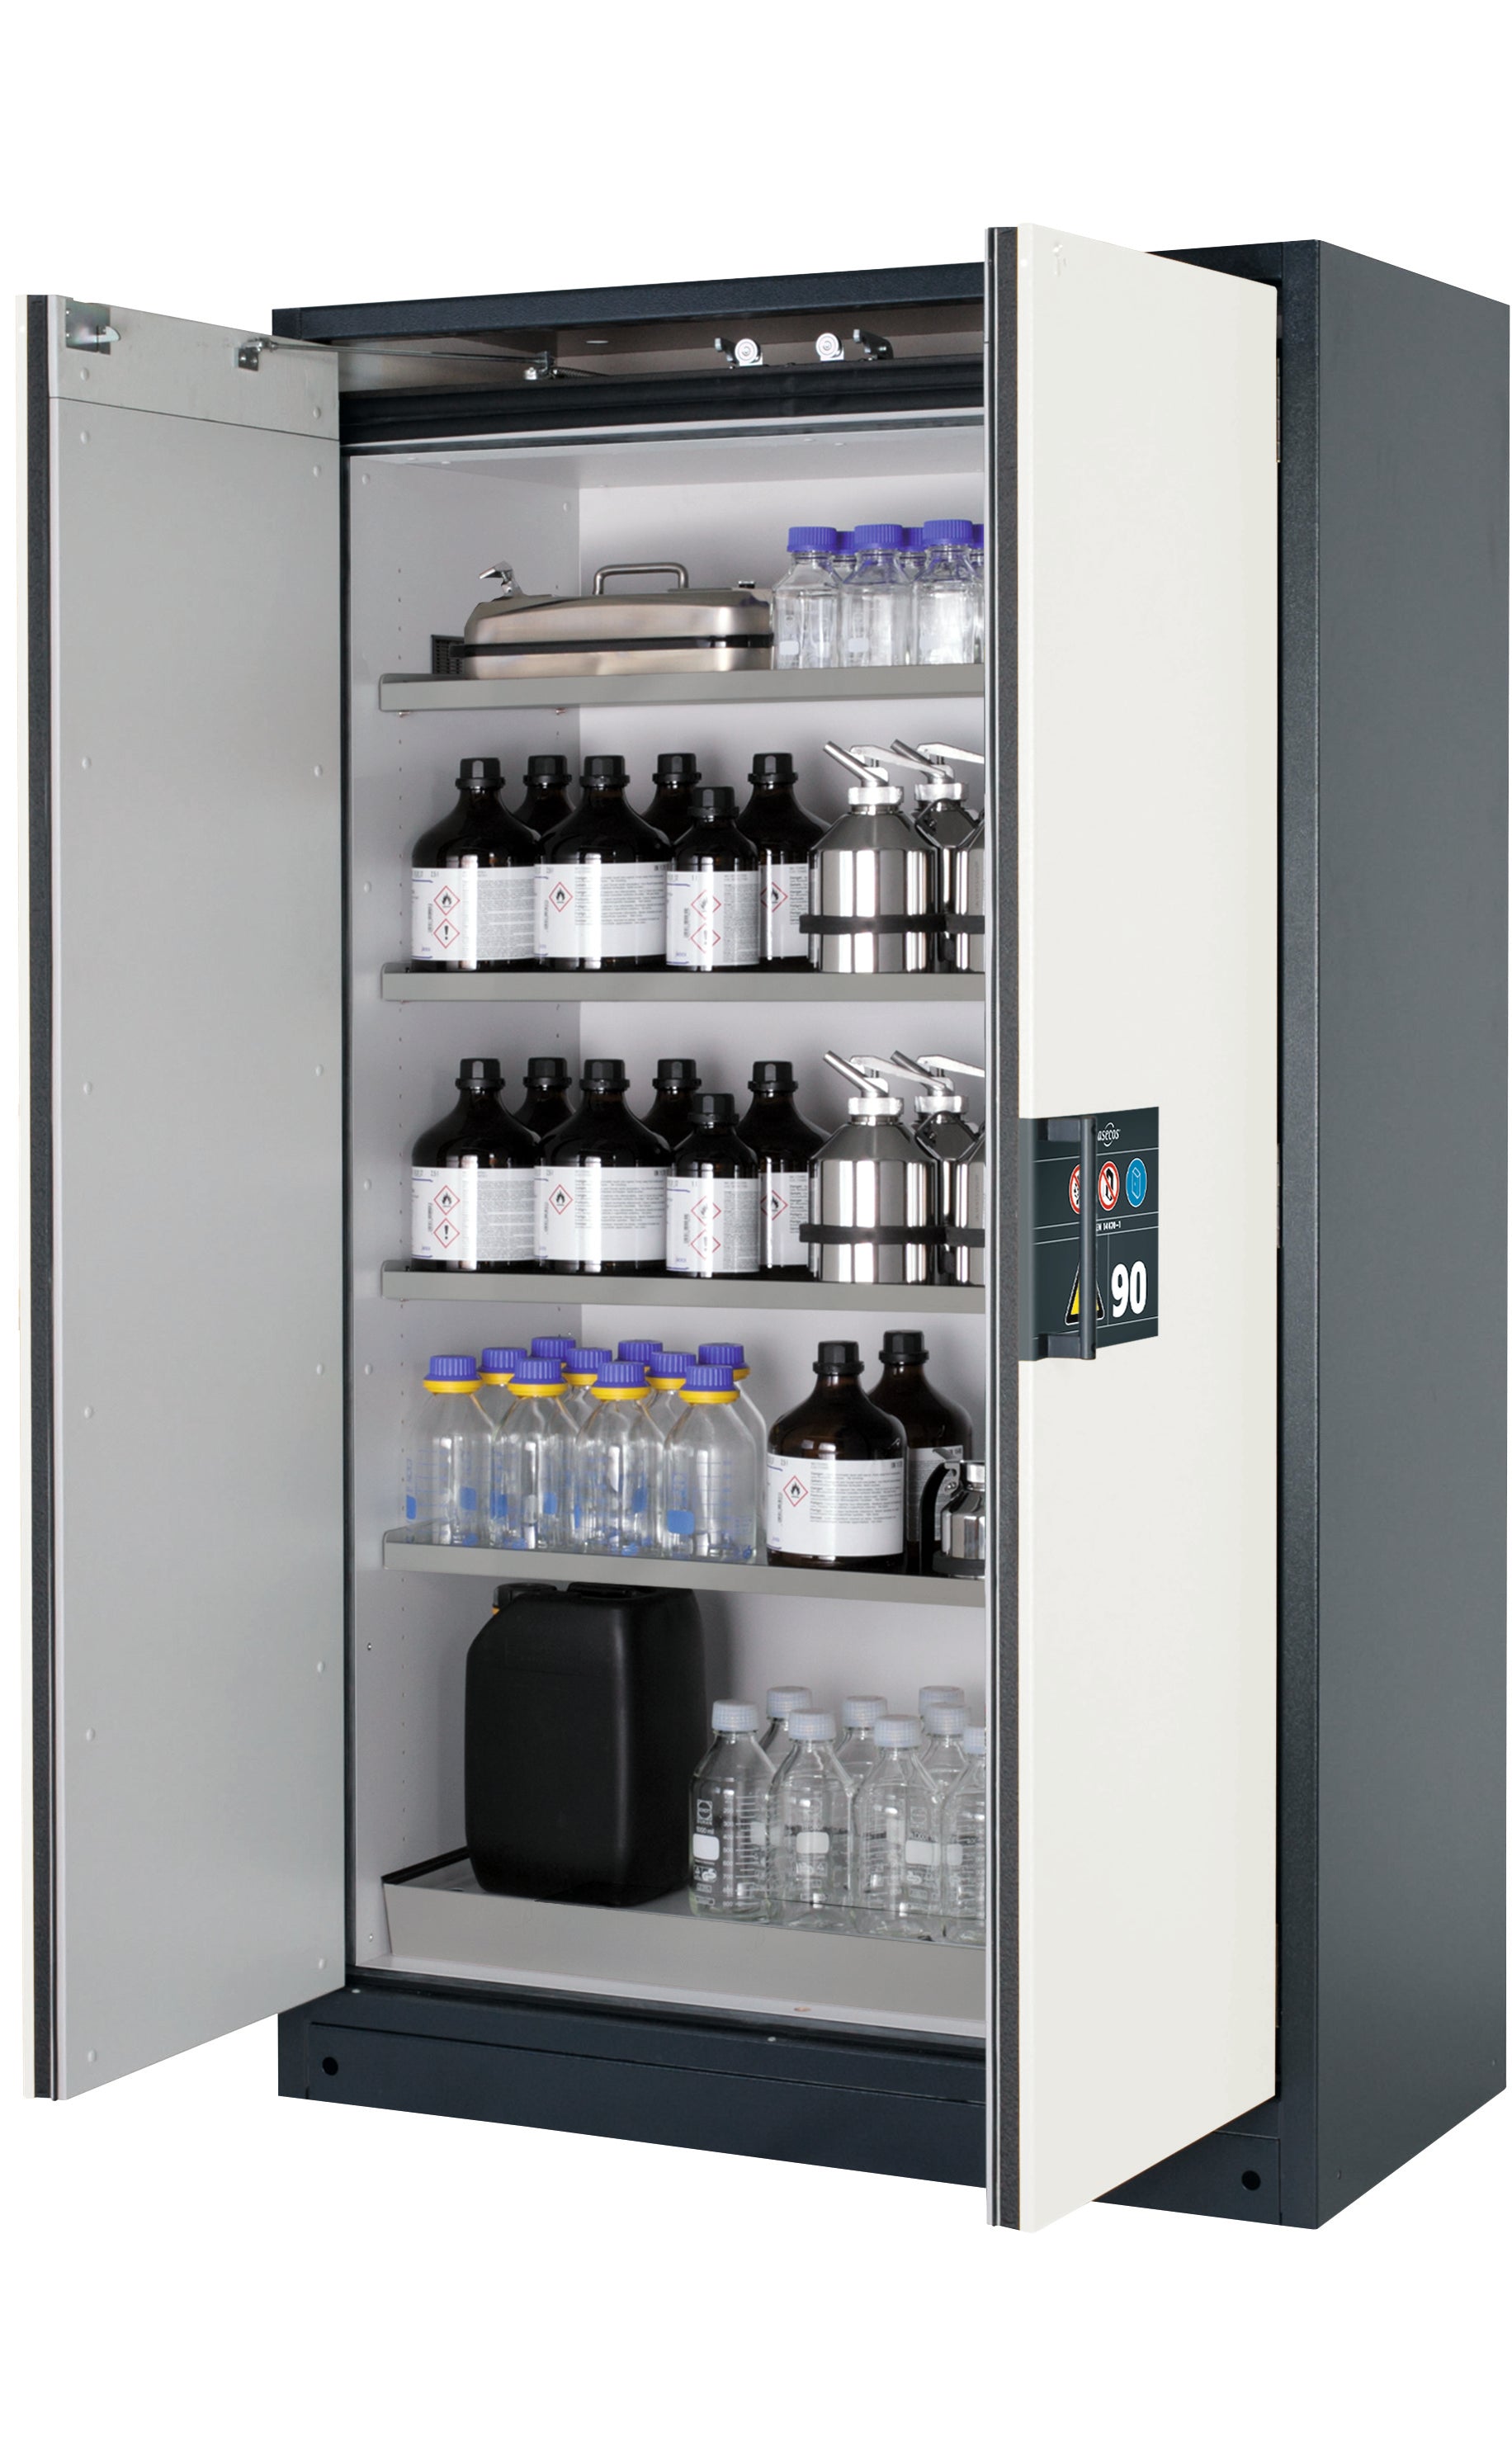 Type 90 safety storage cabinet Q-CLASSIC-90 model Q90.195.120 in pure white RAL 9010 with 4x shelf standard (stainless steel 1.4301),